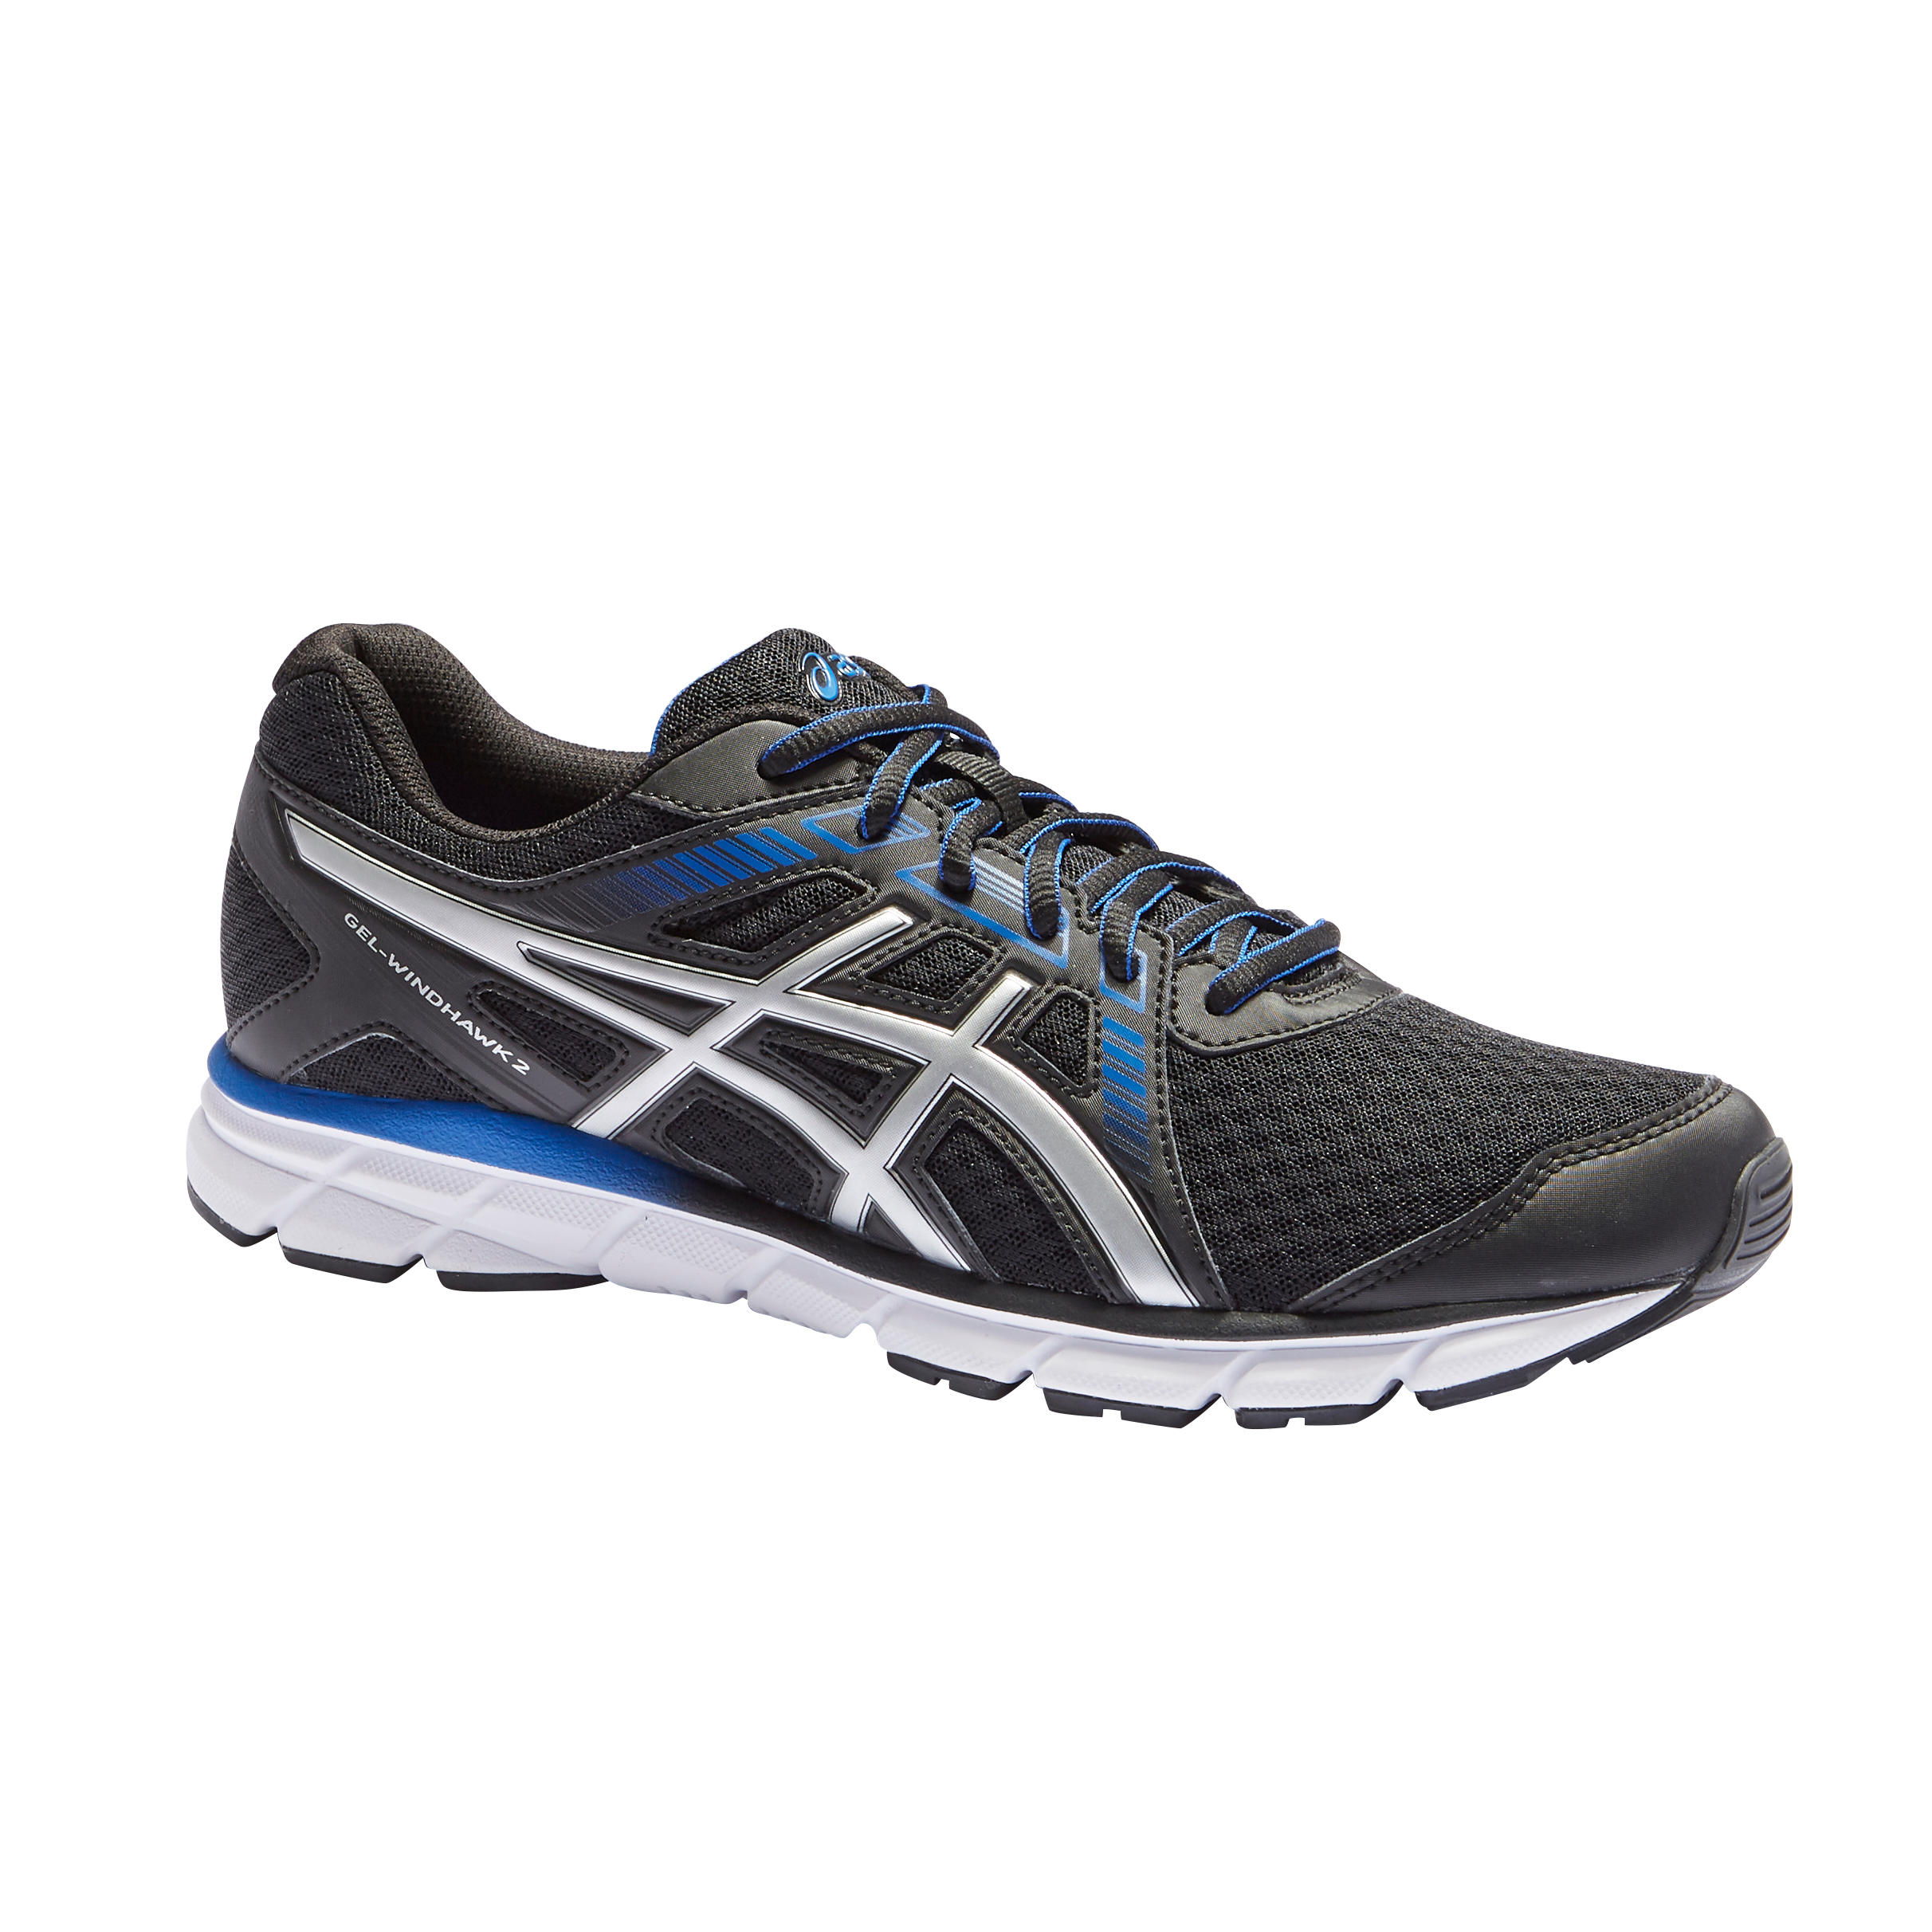 asics windhawk 2 review Shop Clothing 